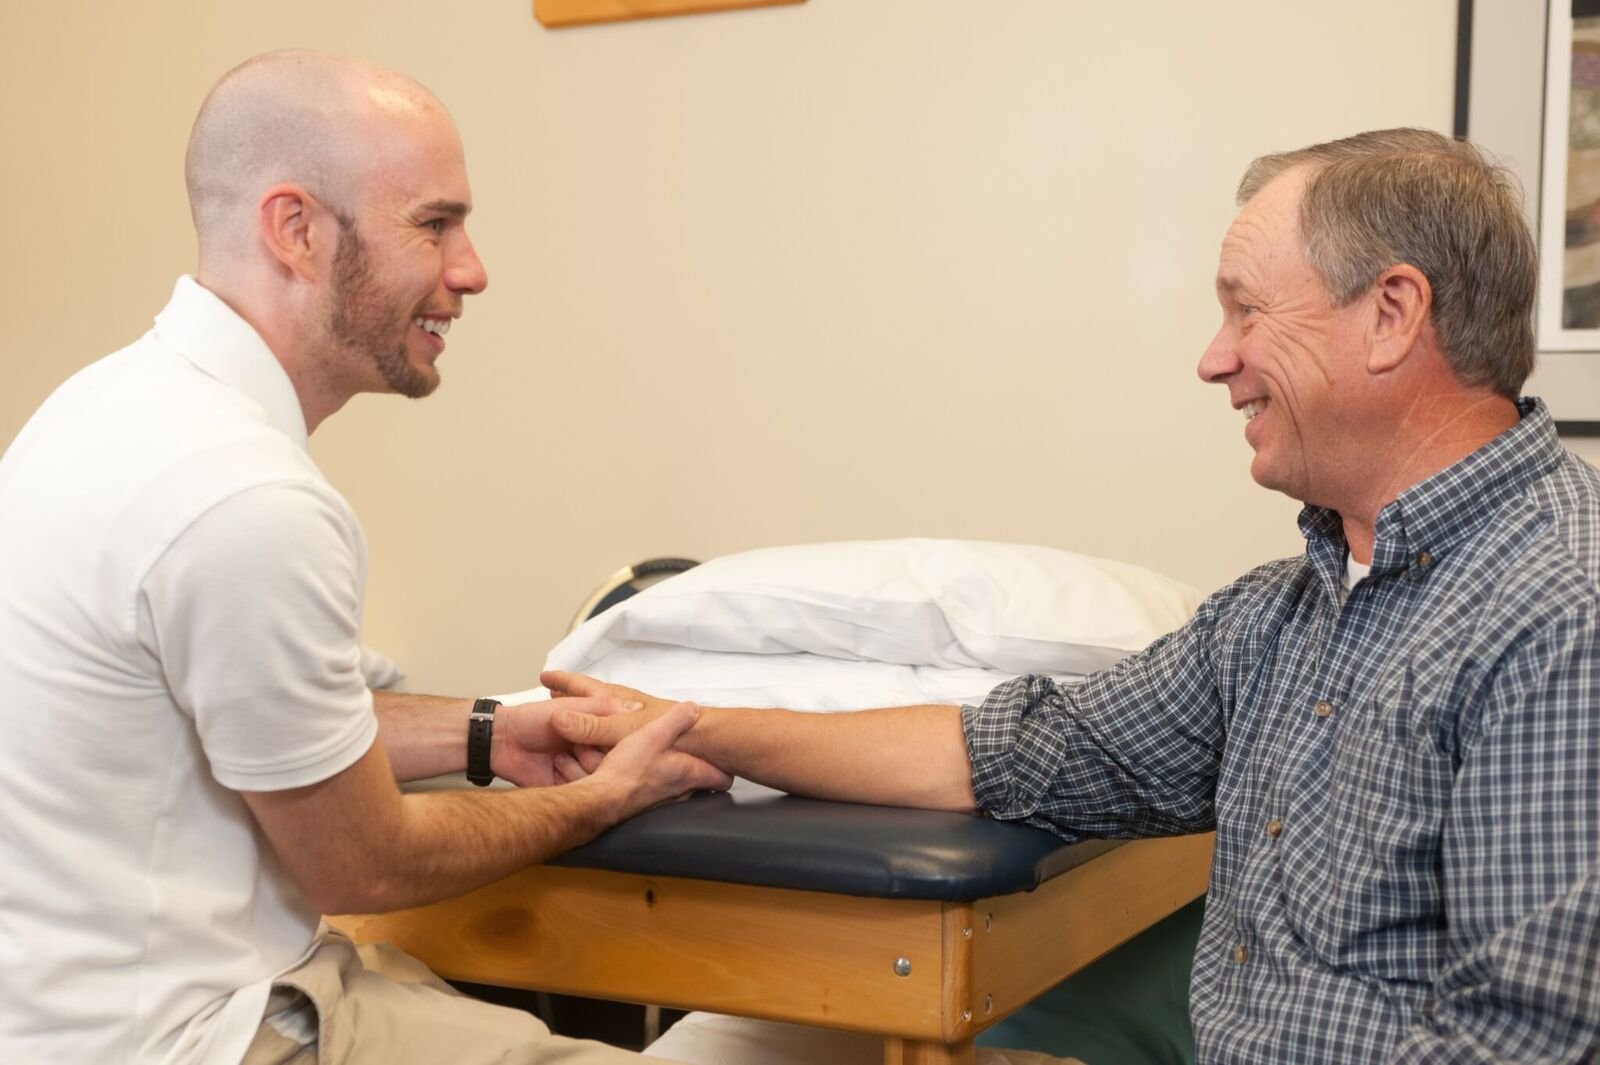 physical therapist Brian assisting with a patient's wrist